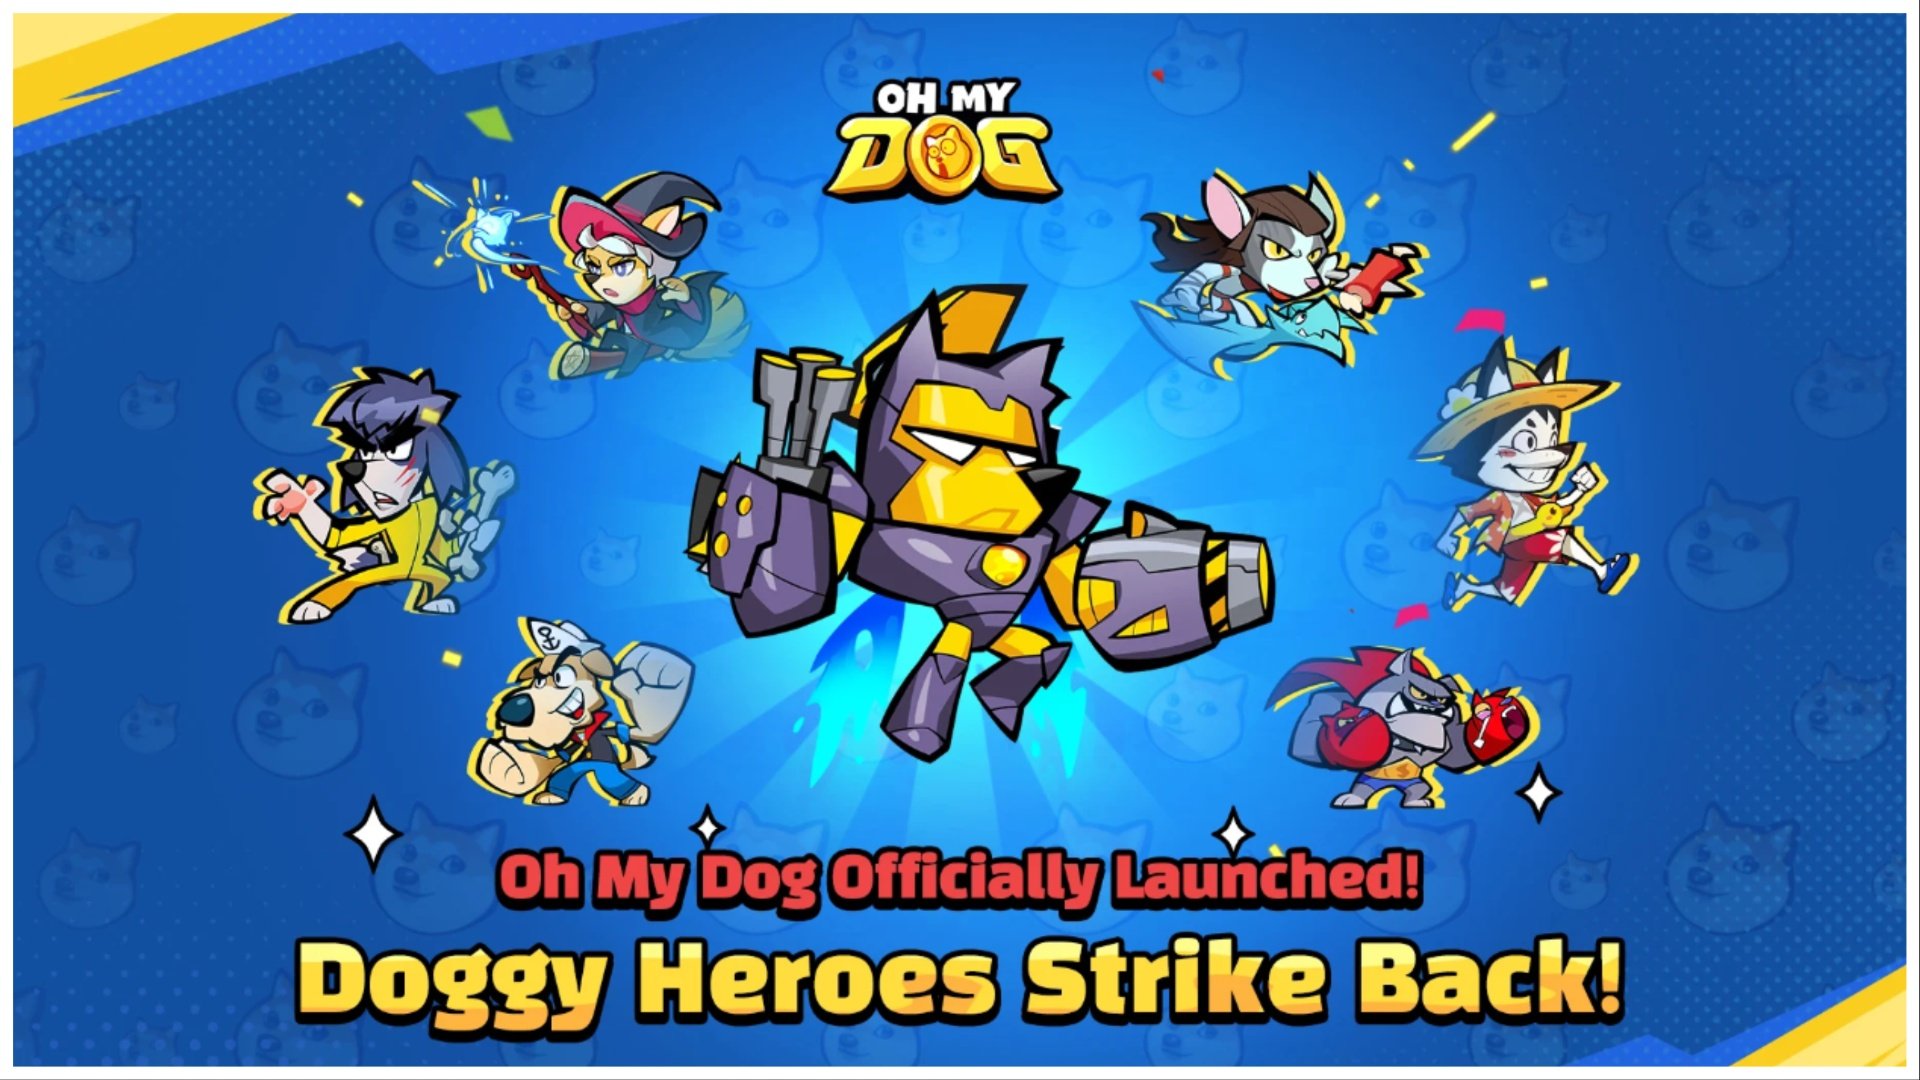 The image shows a bunch of hero dogs spanning across a blue background with a tile print of the doge head. The heroes are all heading toward the outer corners of the illustration surrounding the main focal dog who is enlarged at the centre. The dog in the middle is wearing a black mechanical suit and has yellow fur.